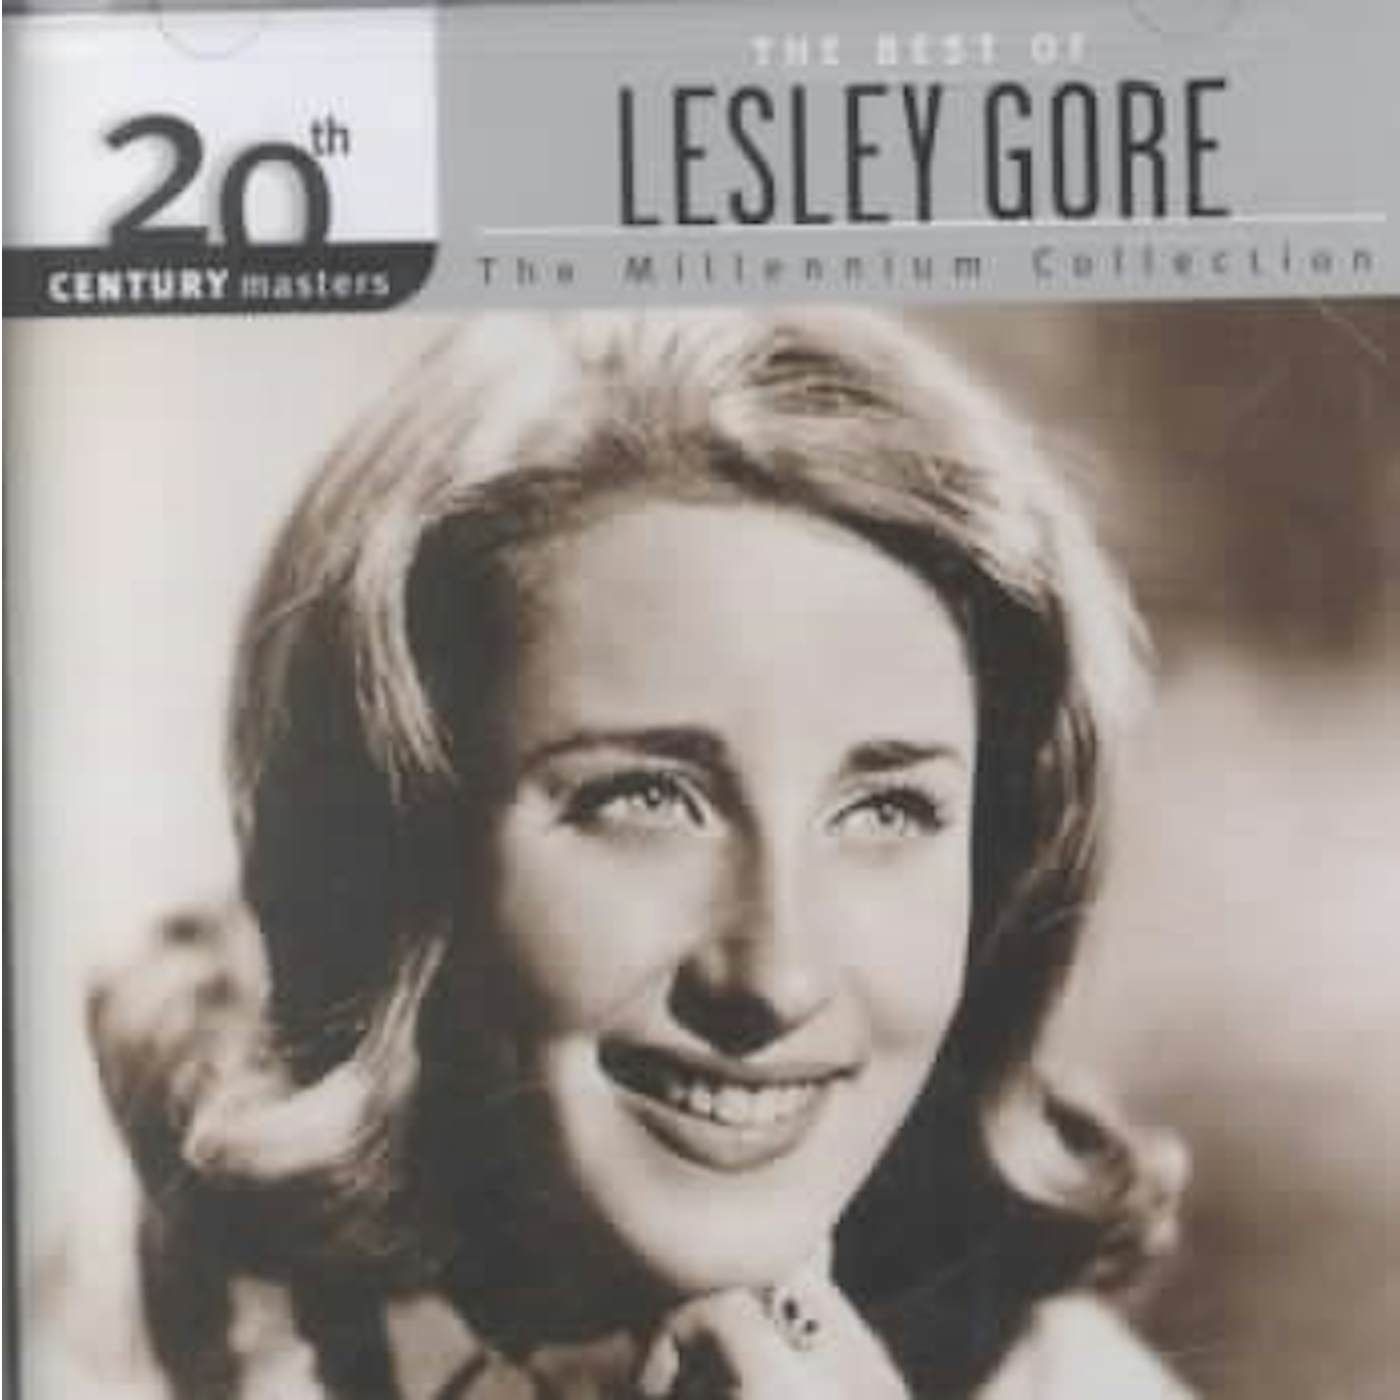 Lesley Gore MILLENNIUM COLLECTION: 20TH CENTURY MASTERS CD